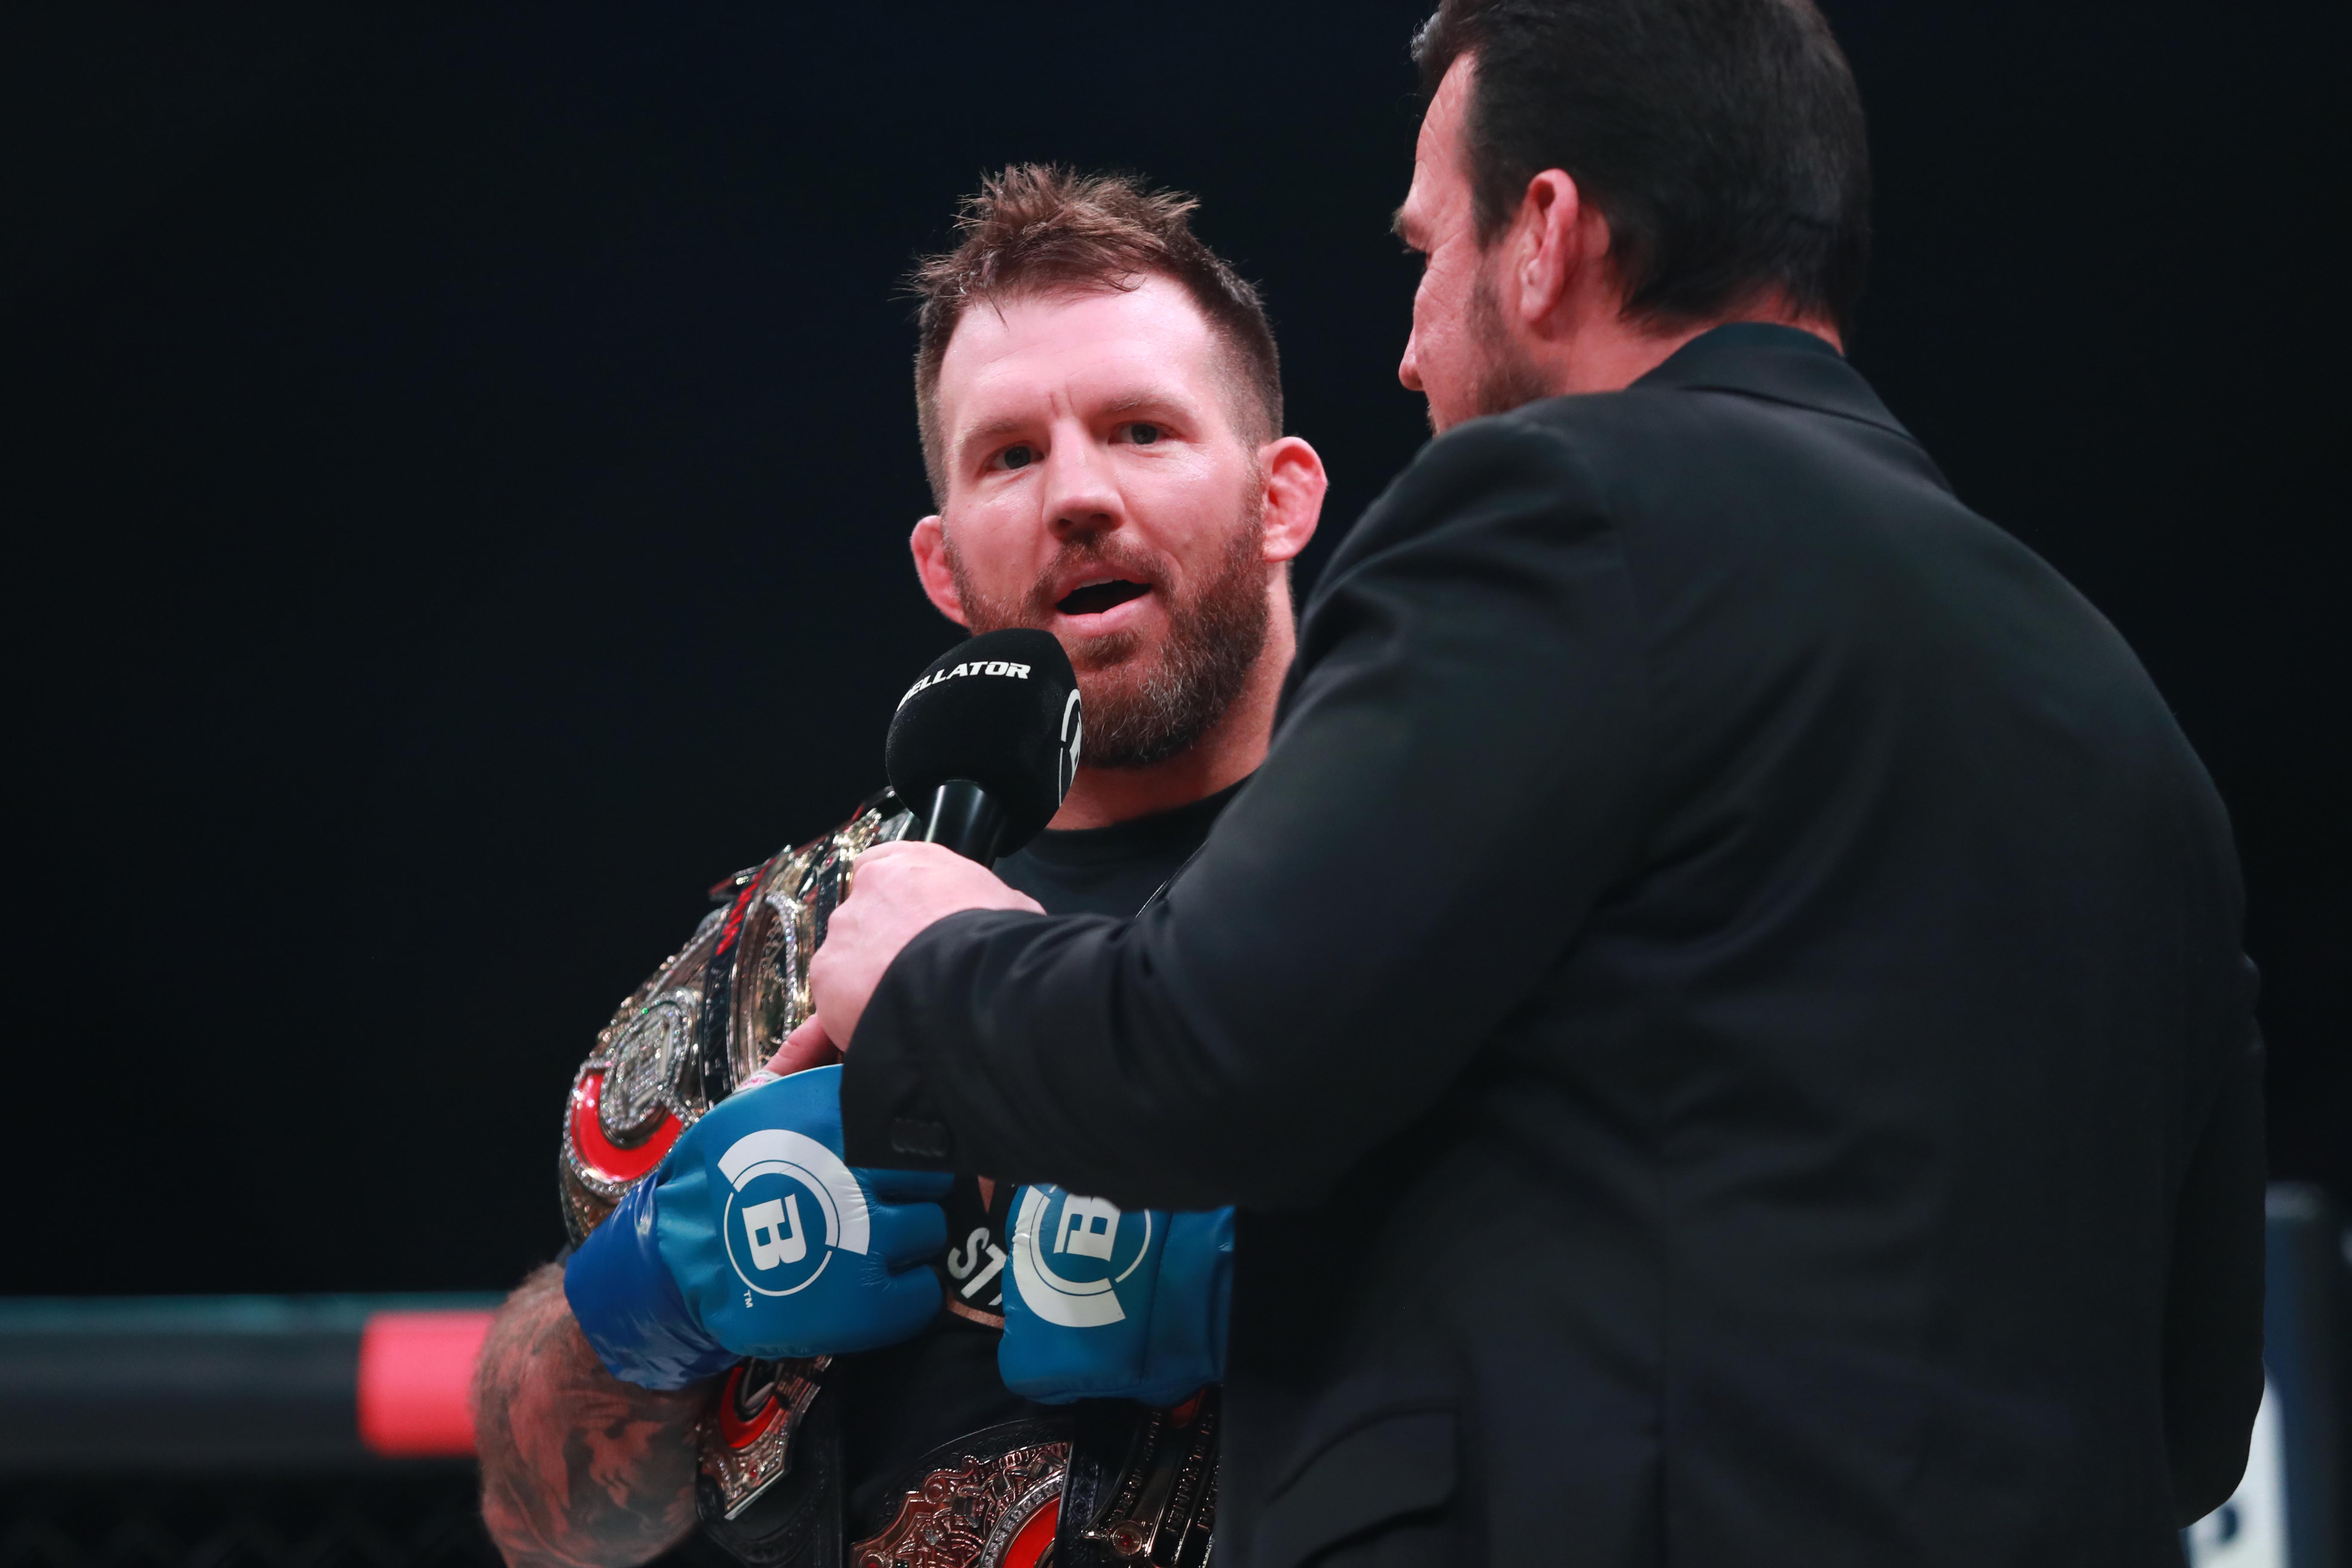 Bellator heavyweight champion, Ryan Bader, sits down with Bloody Elbow ahead of his Bellator 273 title defense against interim champ, Valentin Moldavsky, on January 29th